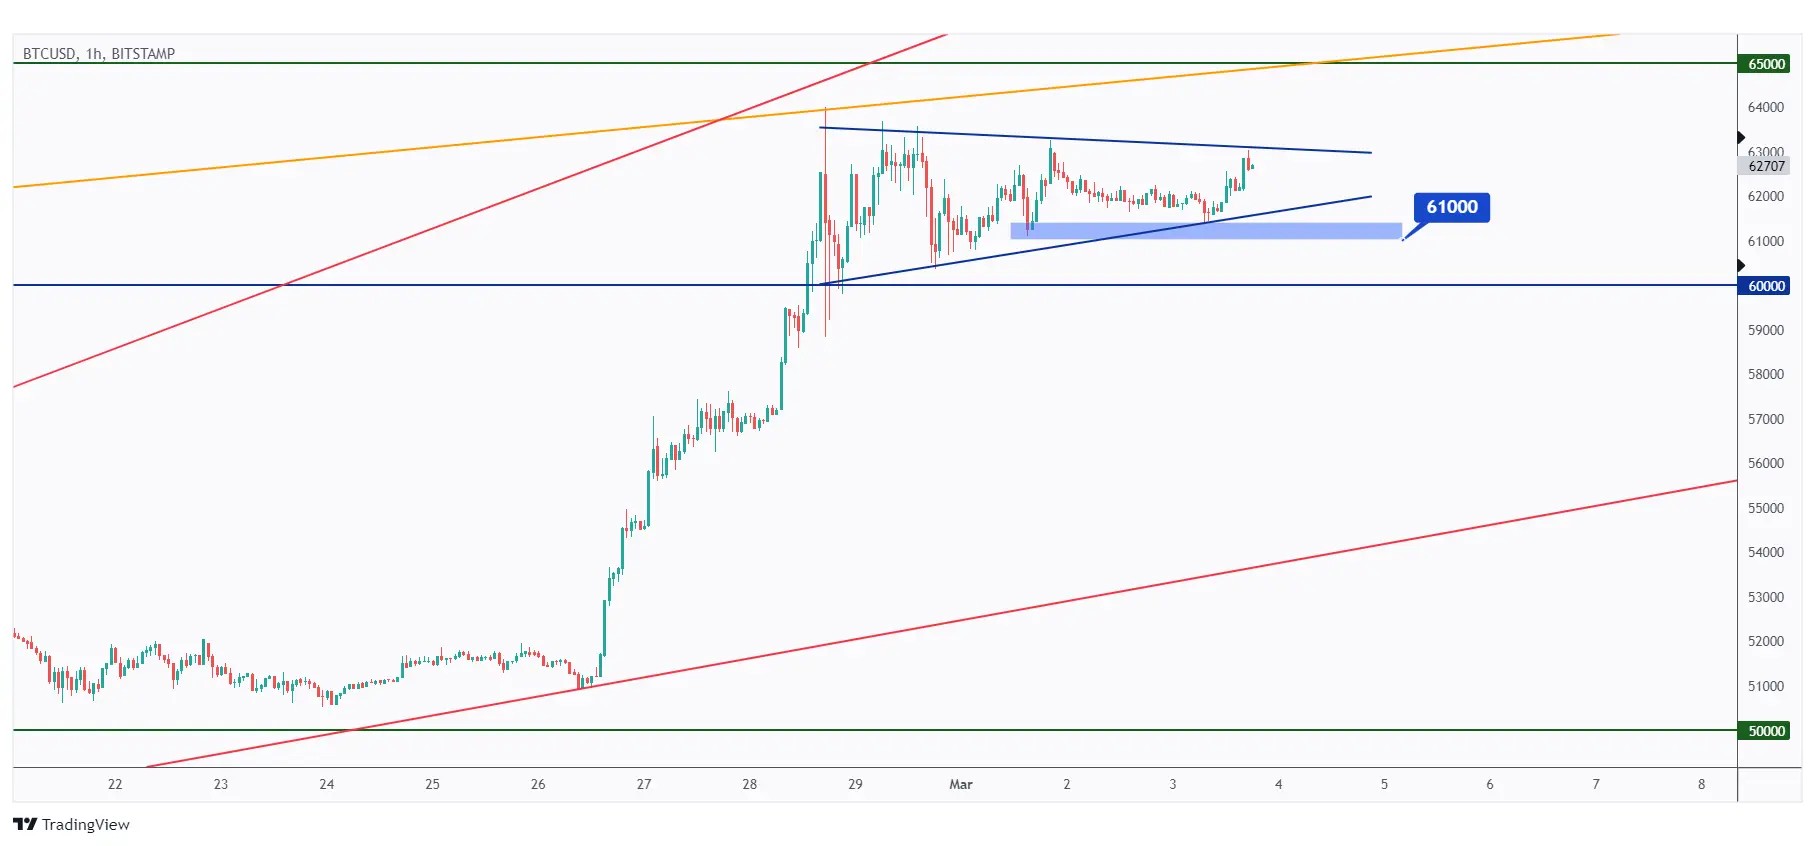 BTC 1h chart showing the last major low at $61,000 that we need a break below for the bears to take over.